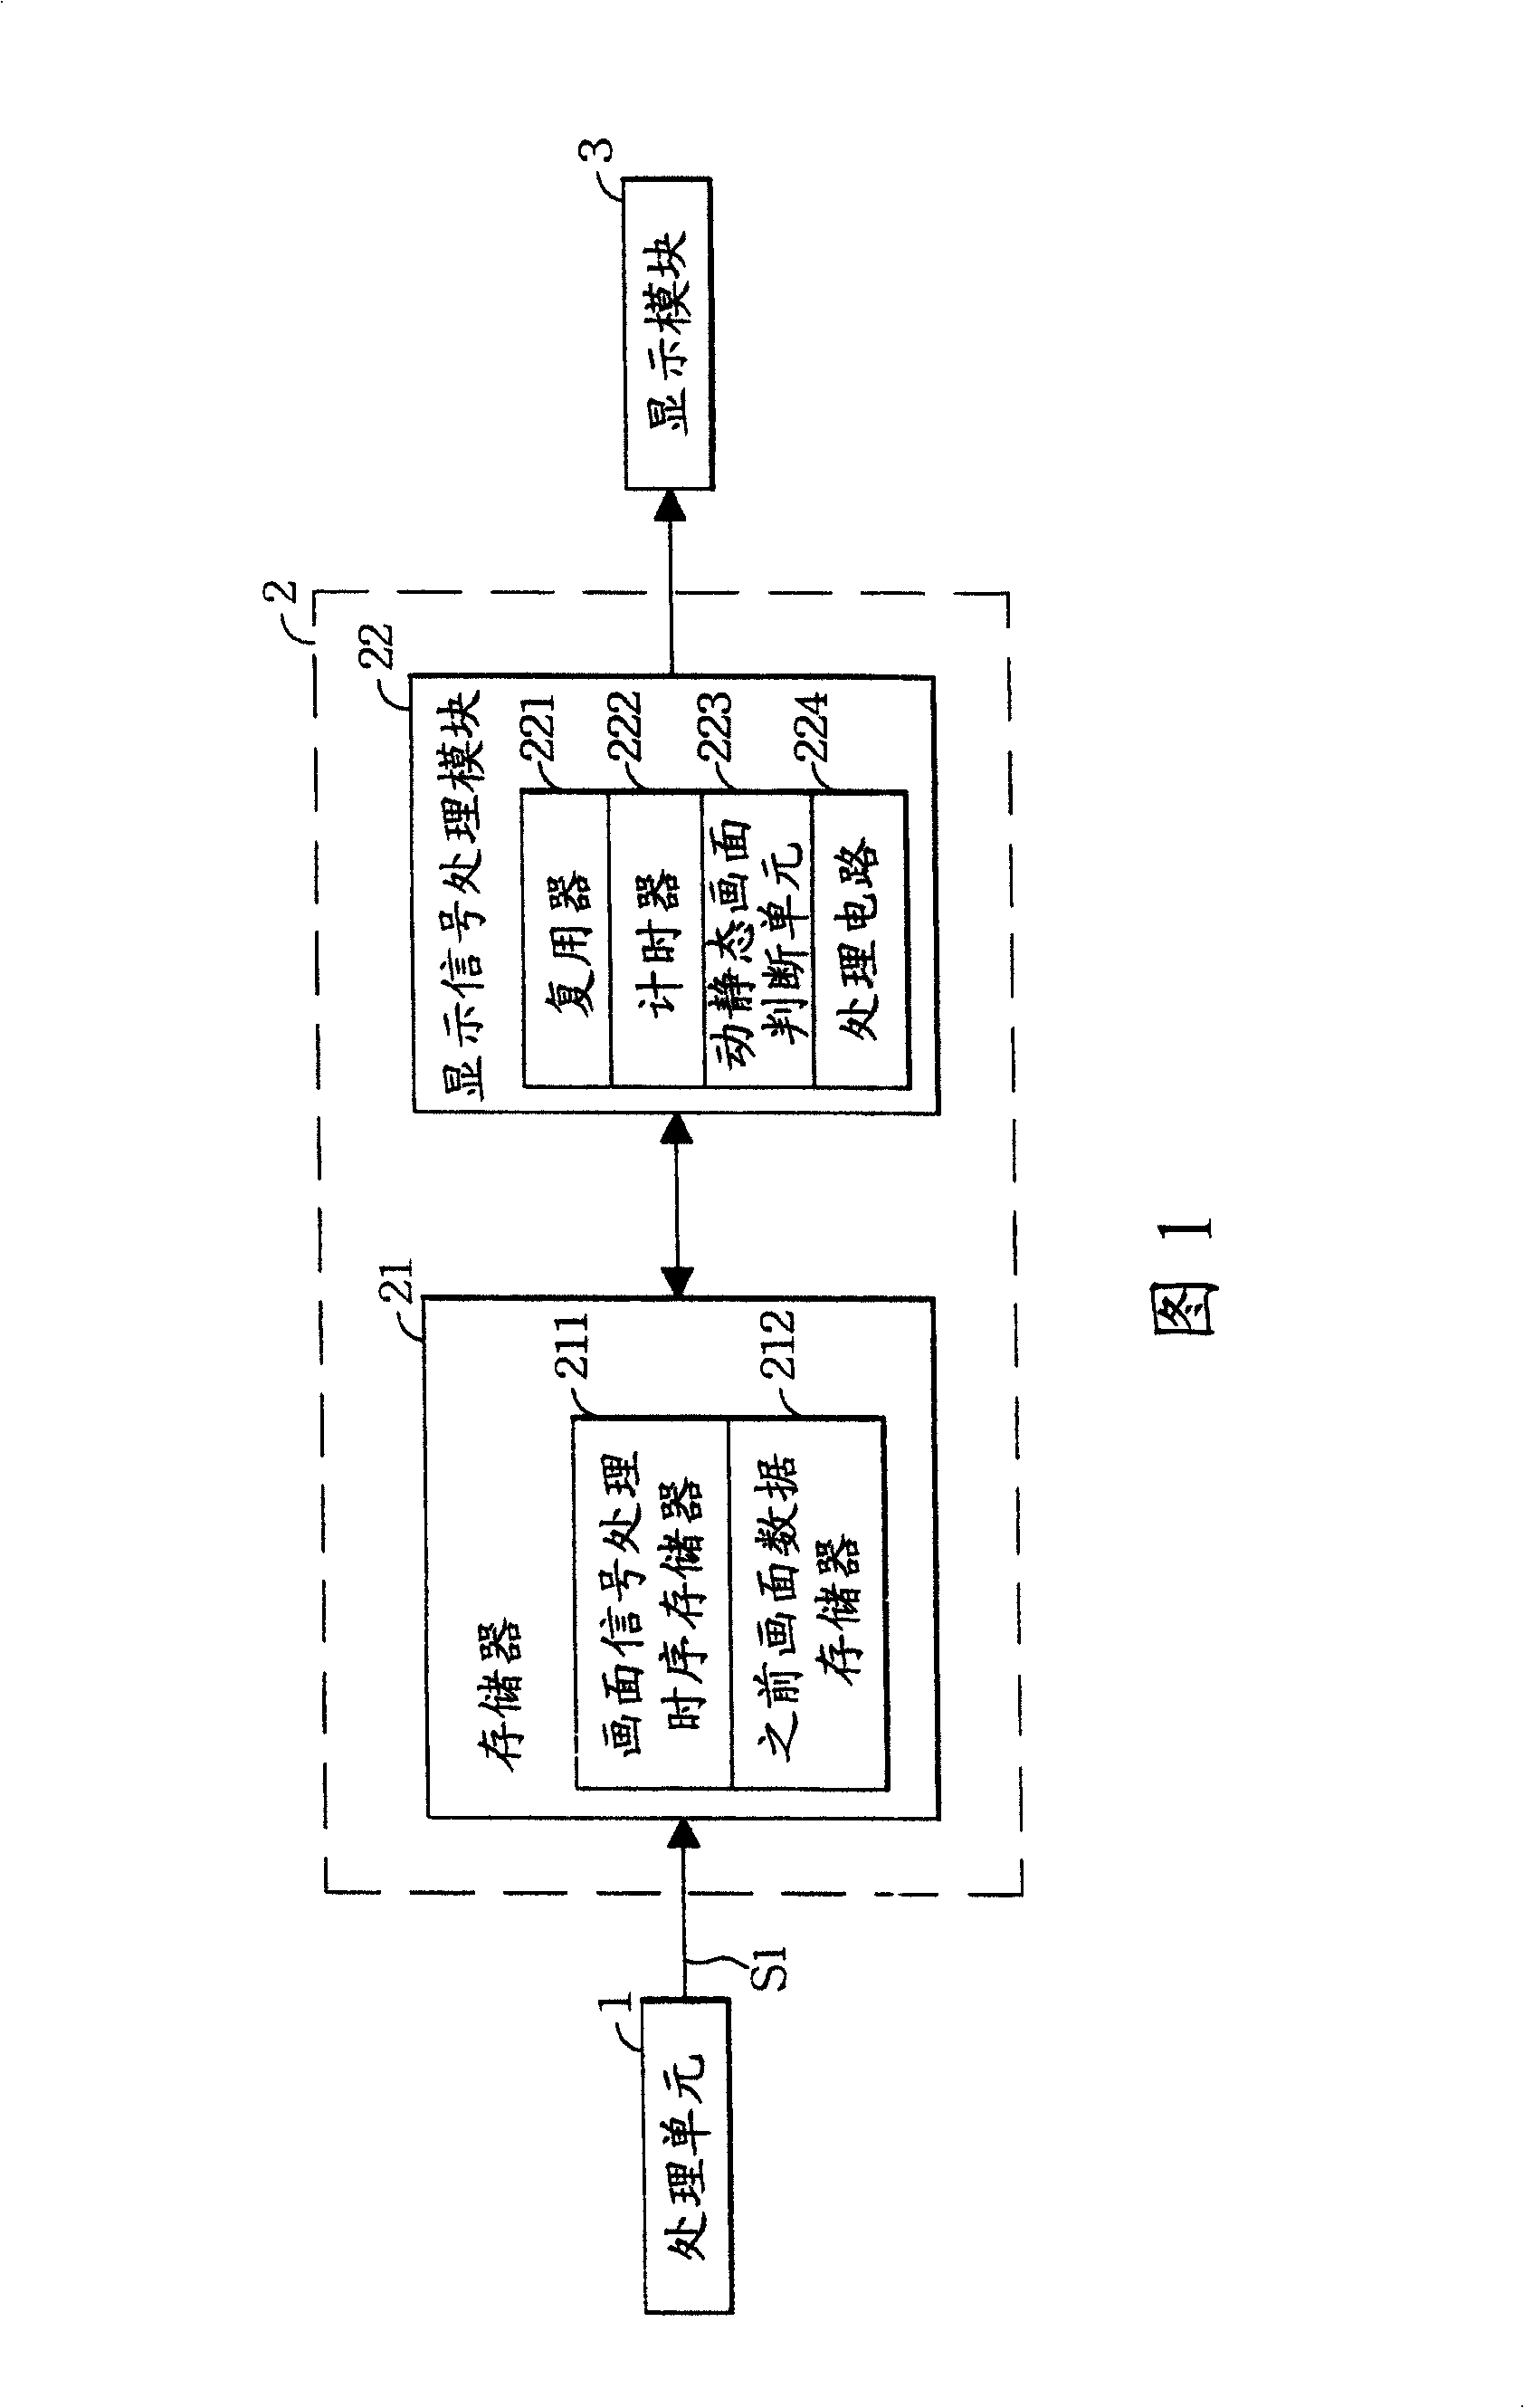 Driving method for LCD